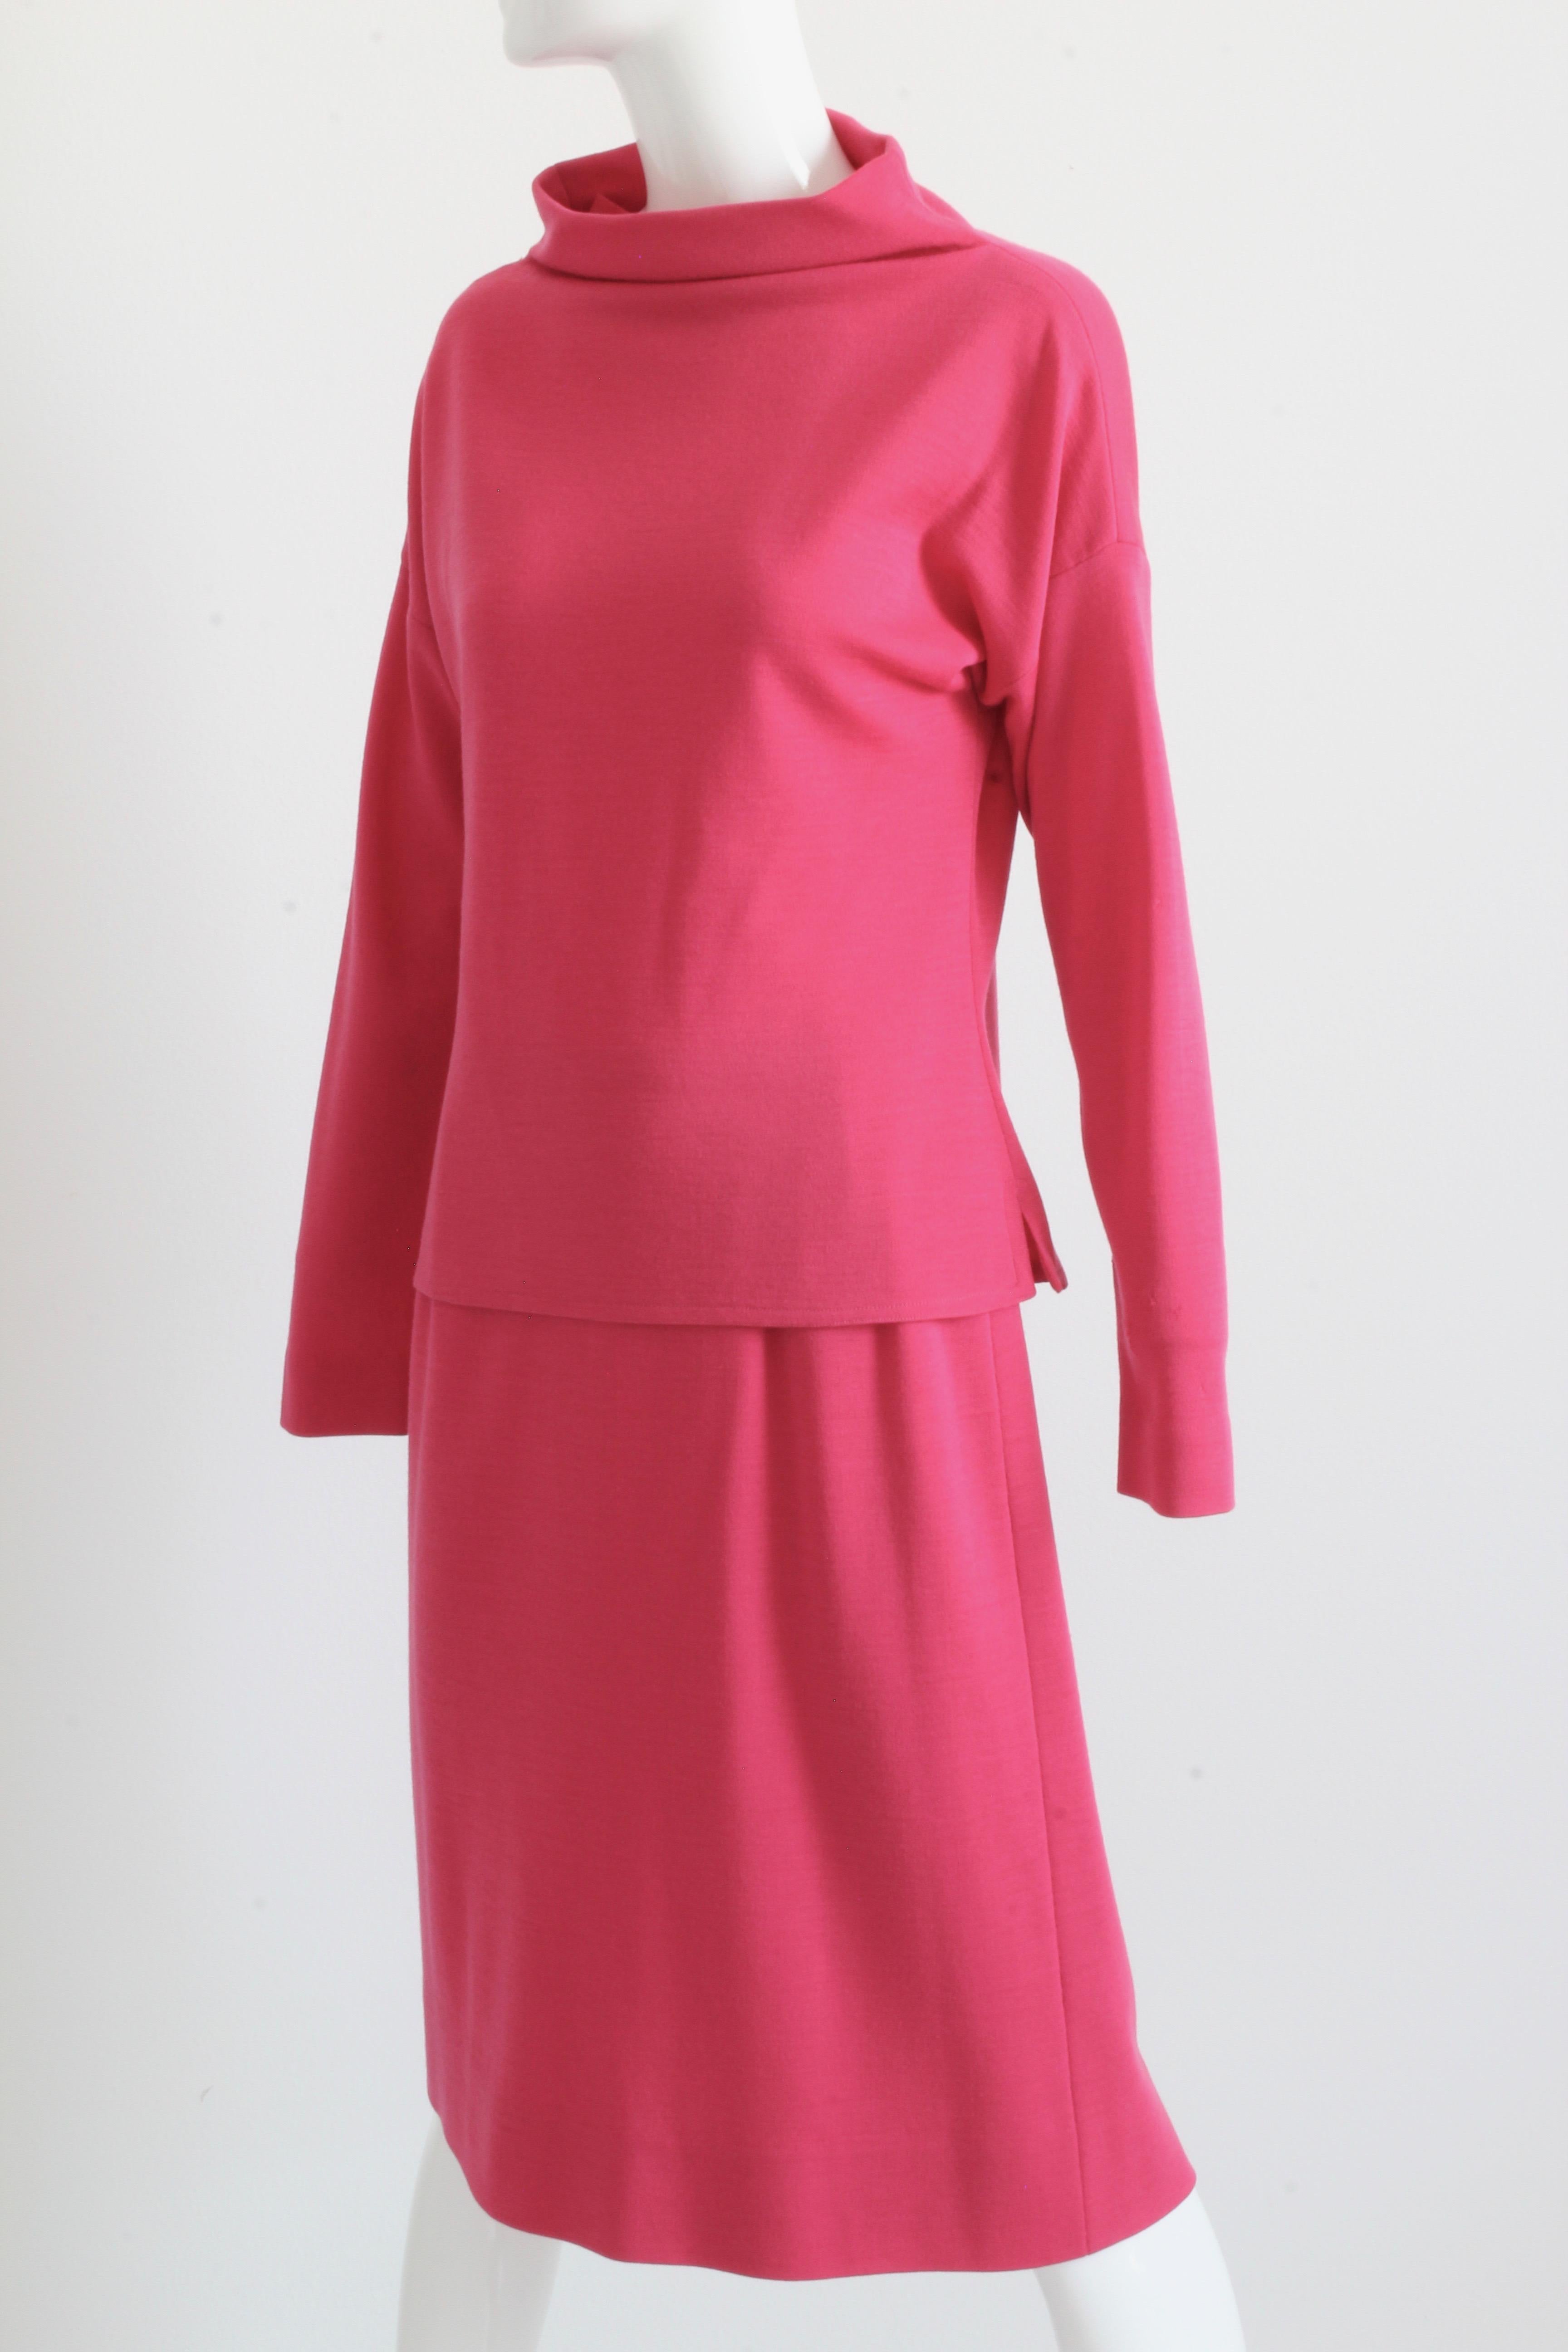 Bonnie Cashin Suit Pink Knit 2pc Set Raglan Top and Skirt Vintage 1960s In Good Condition For Sale In Port Saint Lucie, FL